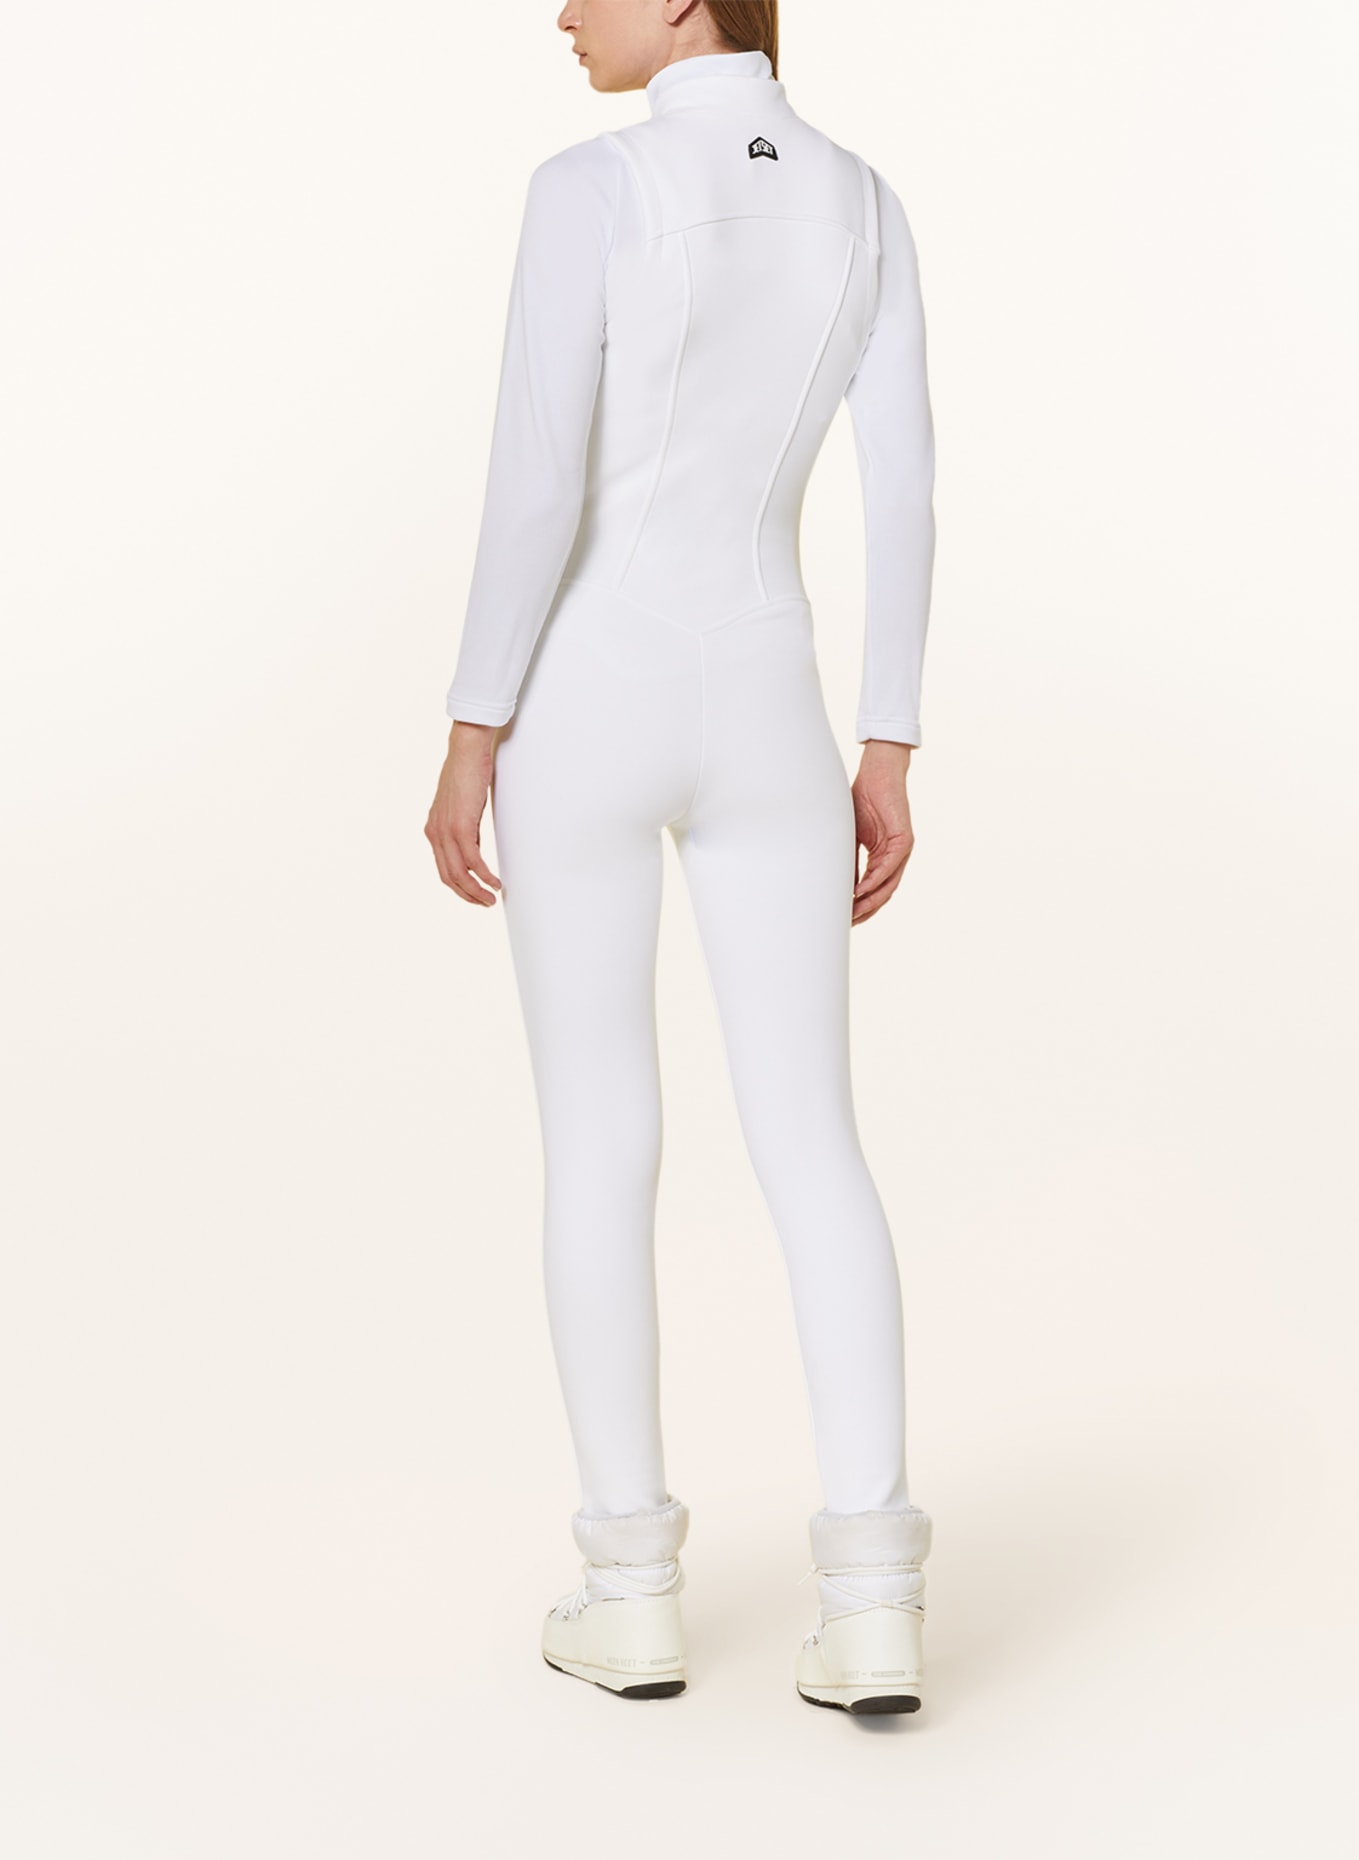 DOMINA in Softshell-Skioverall creme SET JET